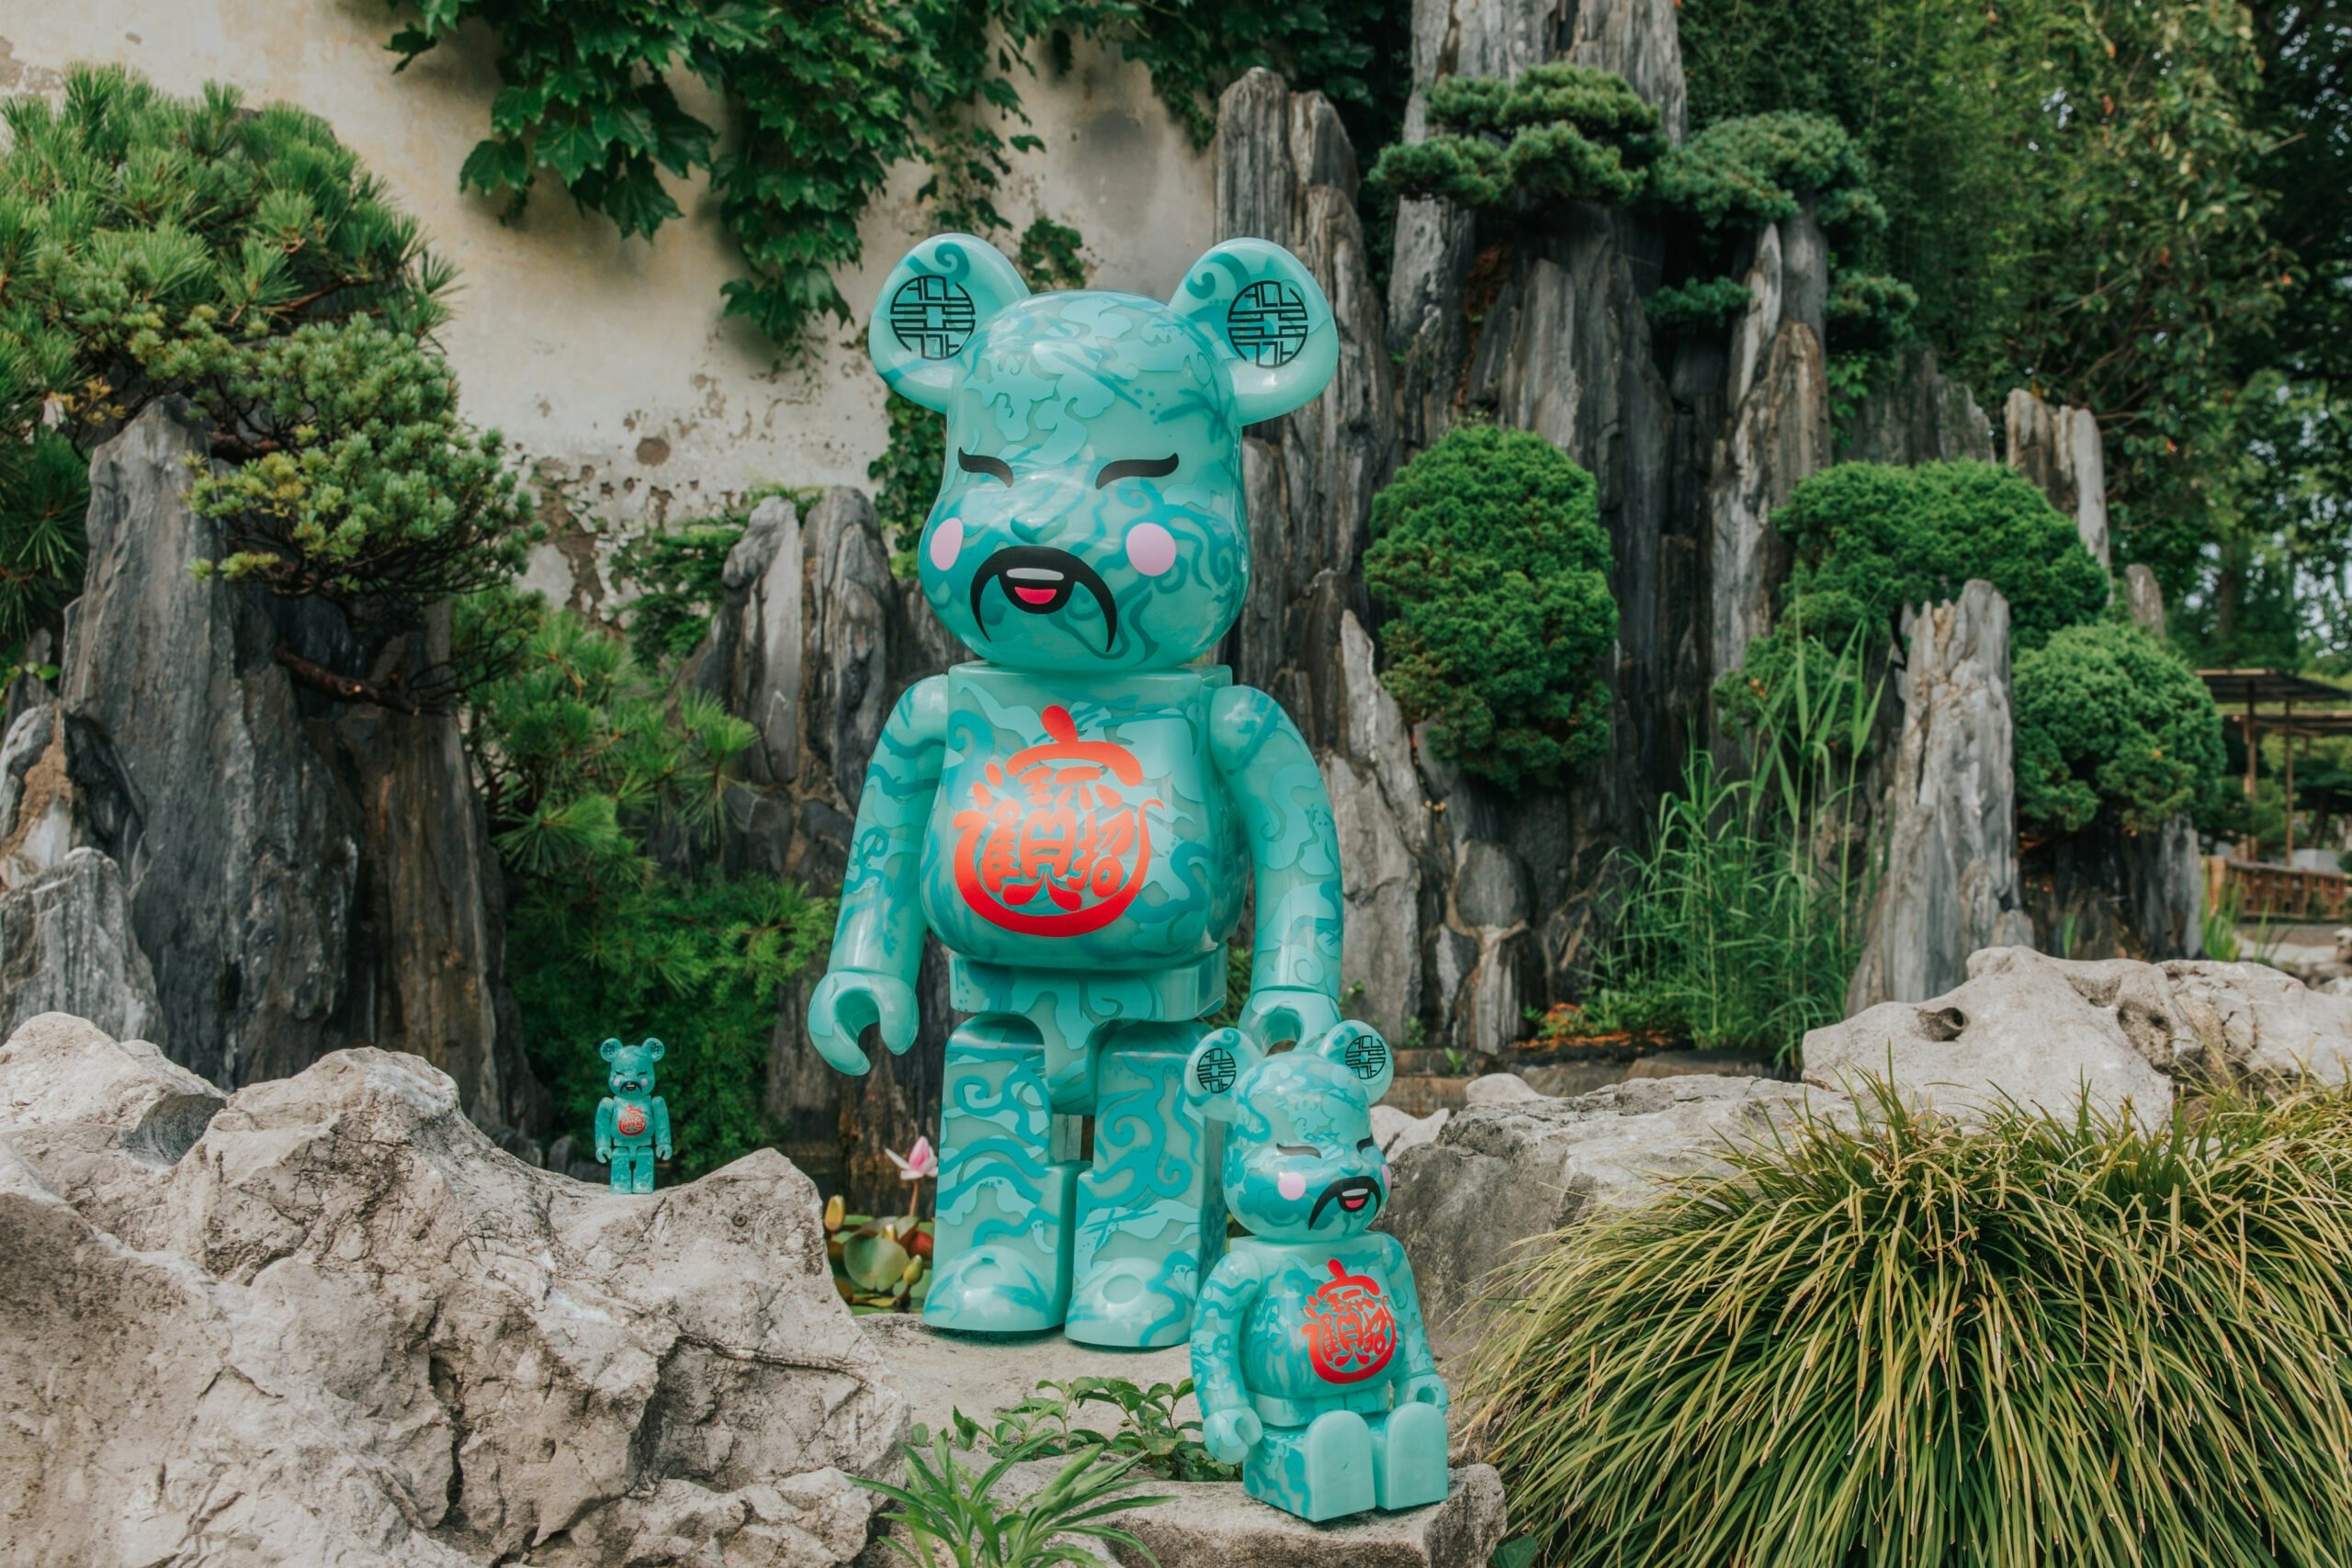 Retailers tapping brands that they would ordinarily stock, such as Acu collaborating with Be@rbrick, is a reliable route to meet the interests of existing consumers. Photo: Acu